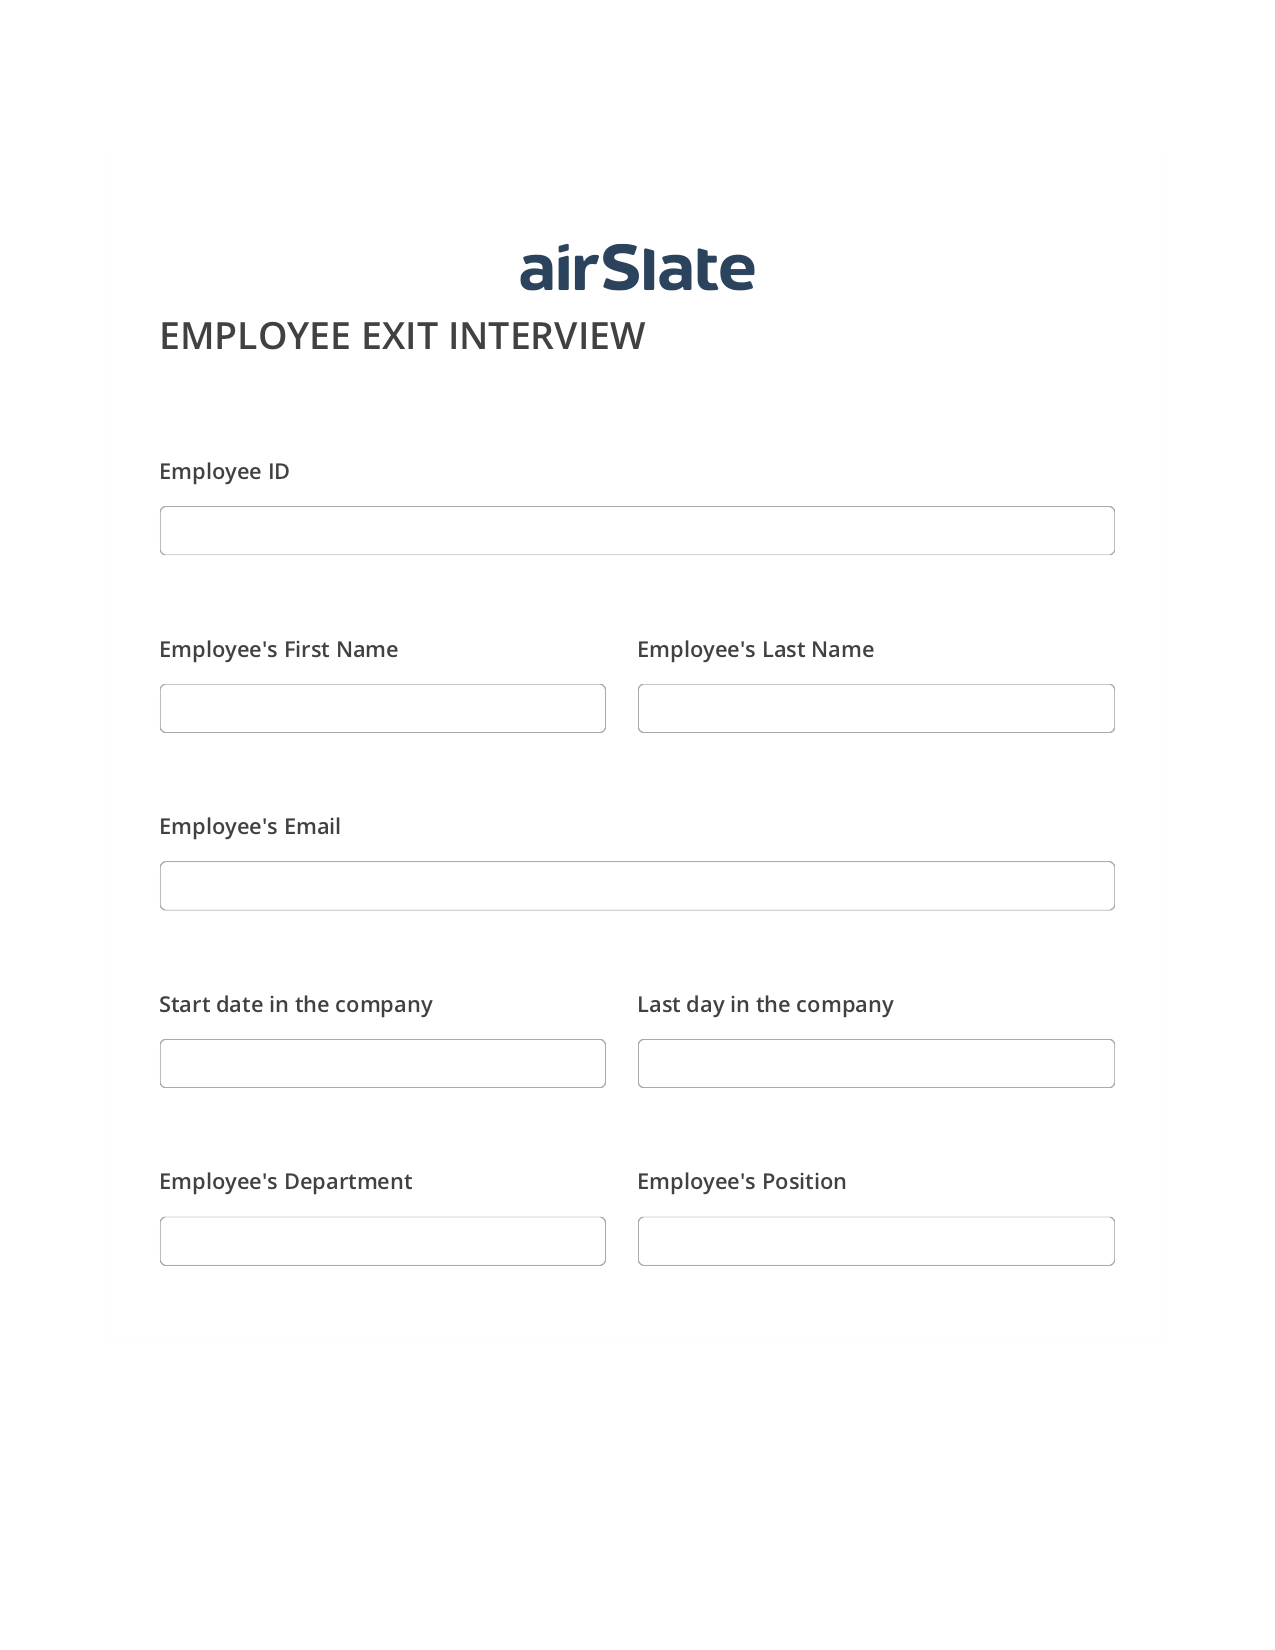 Employee Exit Interview Flow Create Slate Reminder Bot